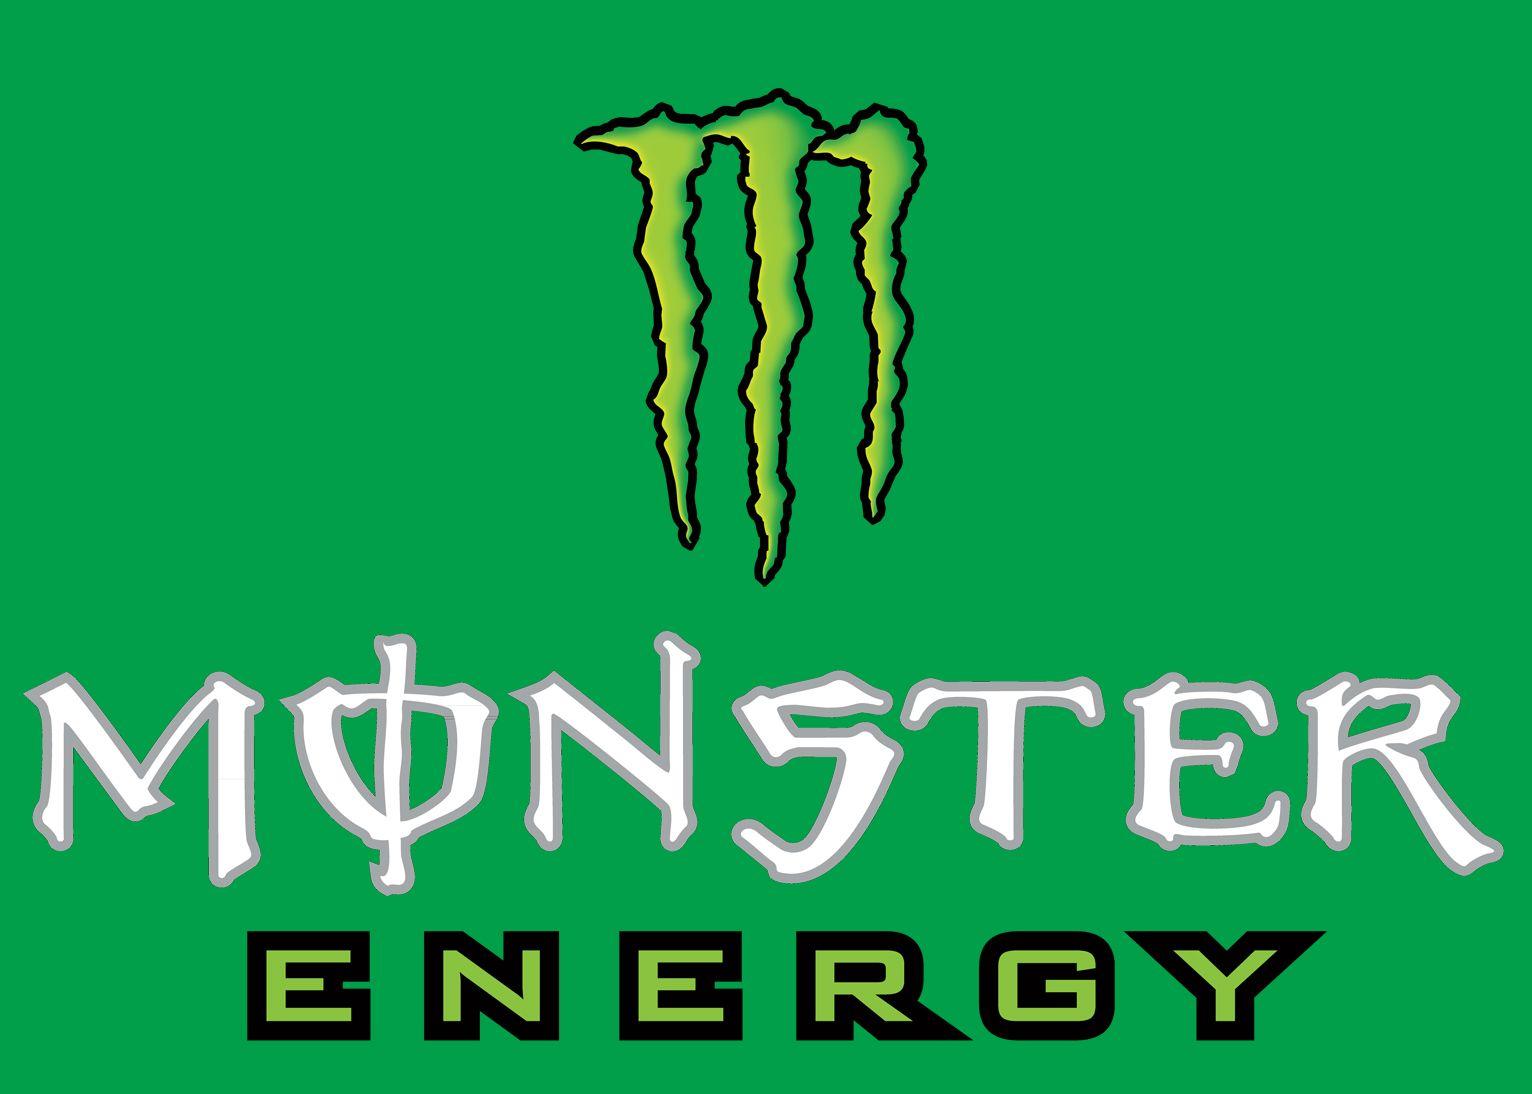 The Monster Energy Logo - Monster Energy Logo, Monster Energy Symbol, Meaning, History